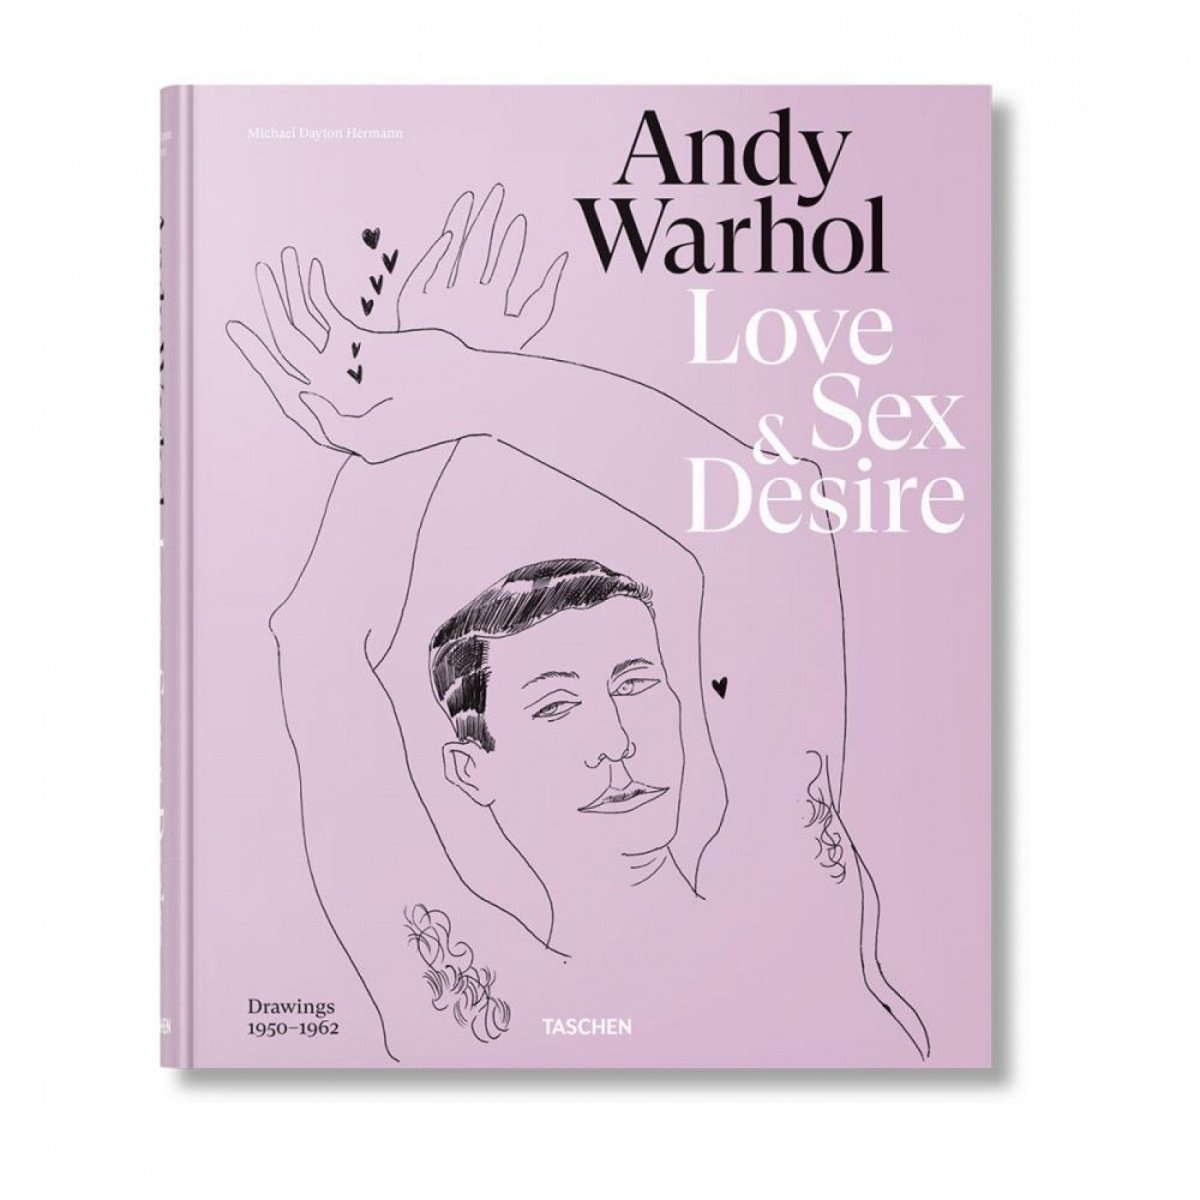 Image of Taschen Andy Warhol. Love,Sex, and Desire. 1950-1962